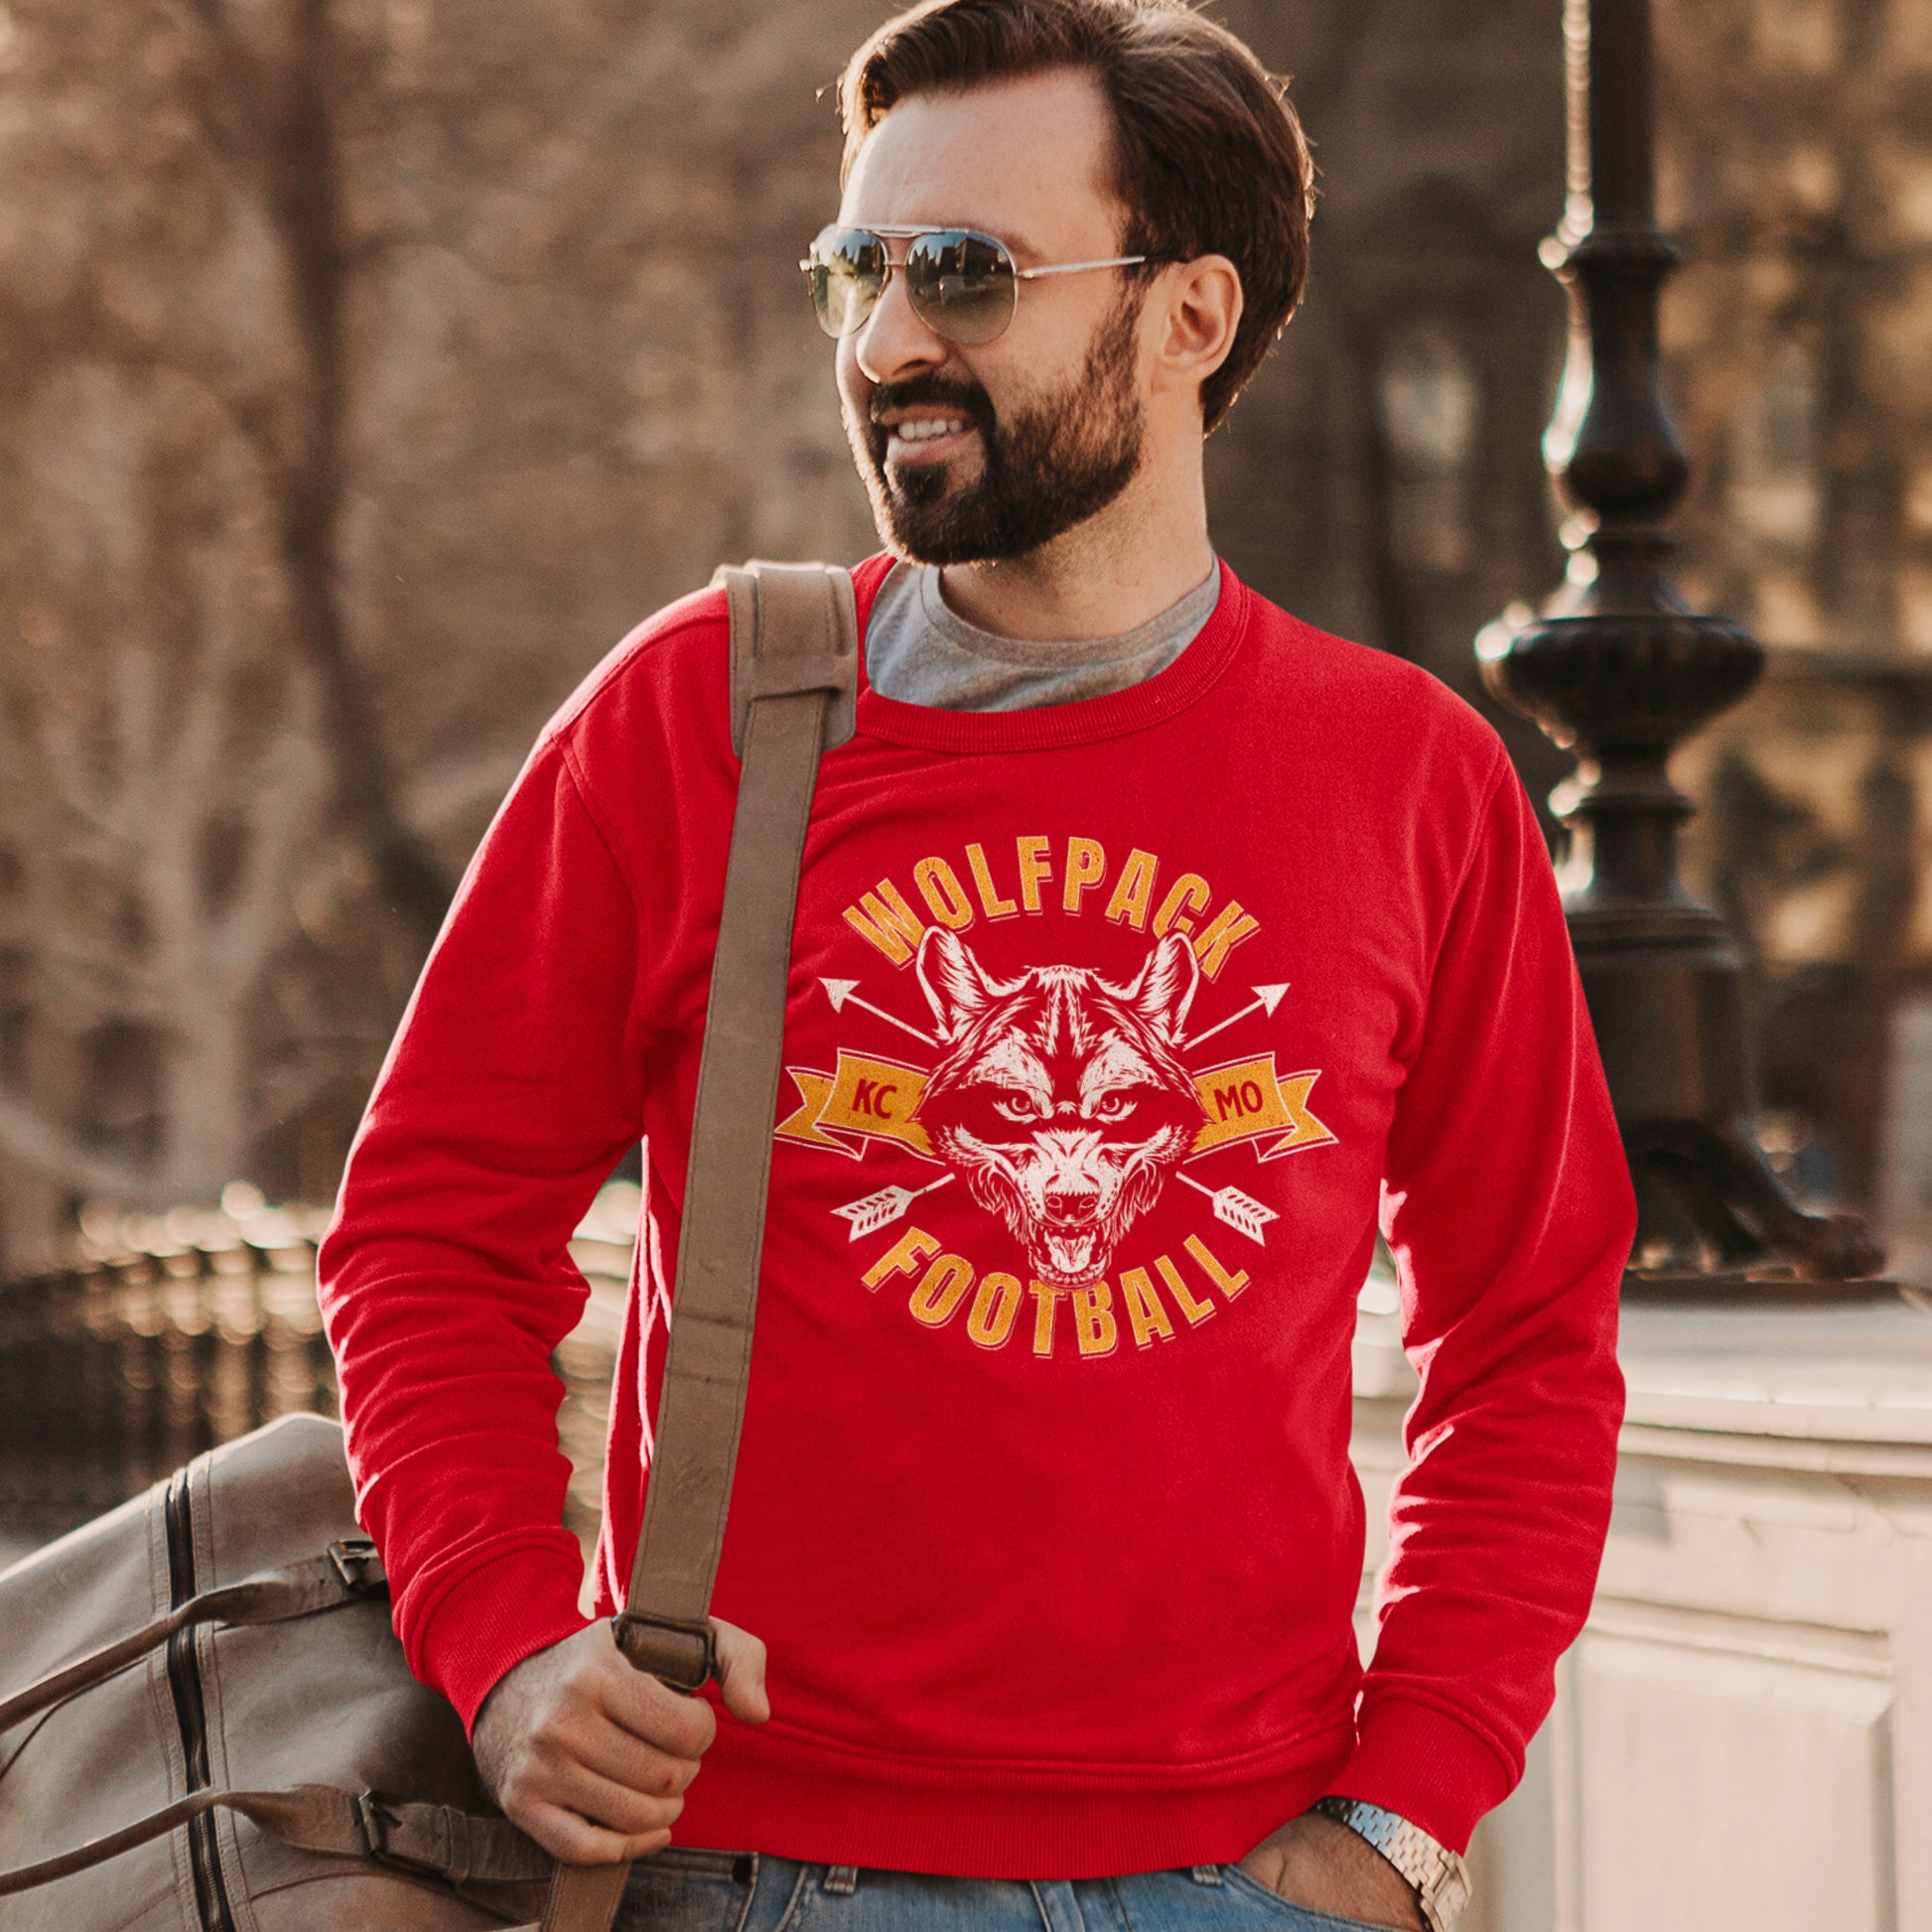 KC Swag Kansas City Chiefs Distressed White & Gold Wolfpack Football on a Red Crewneck Sweatshirt worn by a male model on a bridge carrying a duffle bag over the shoulder